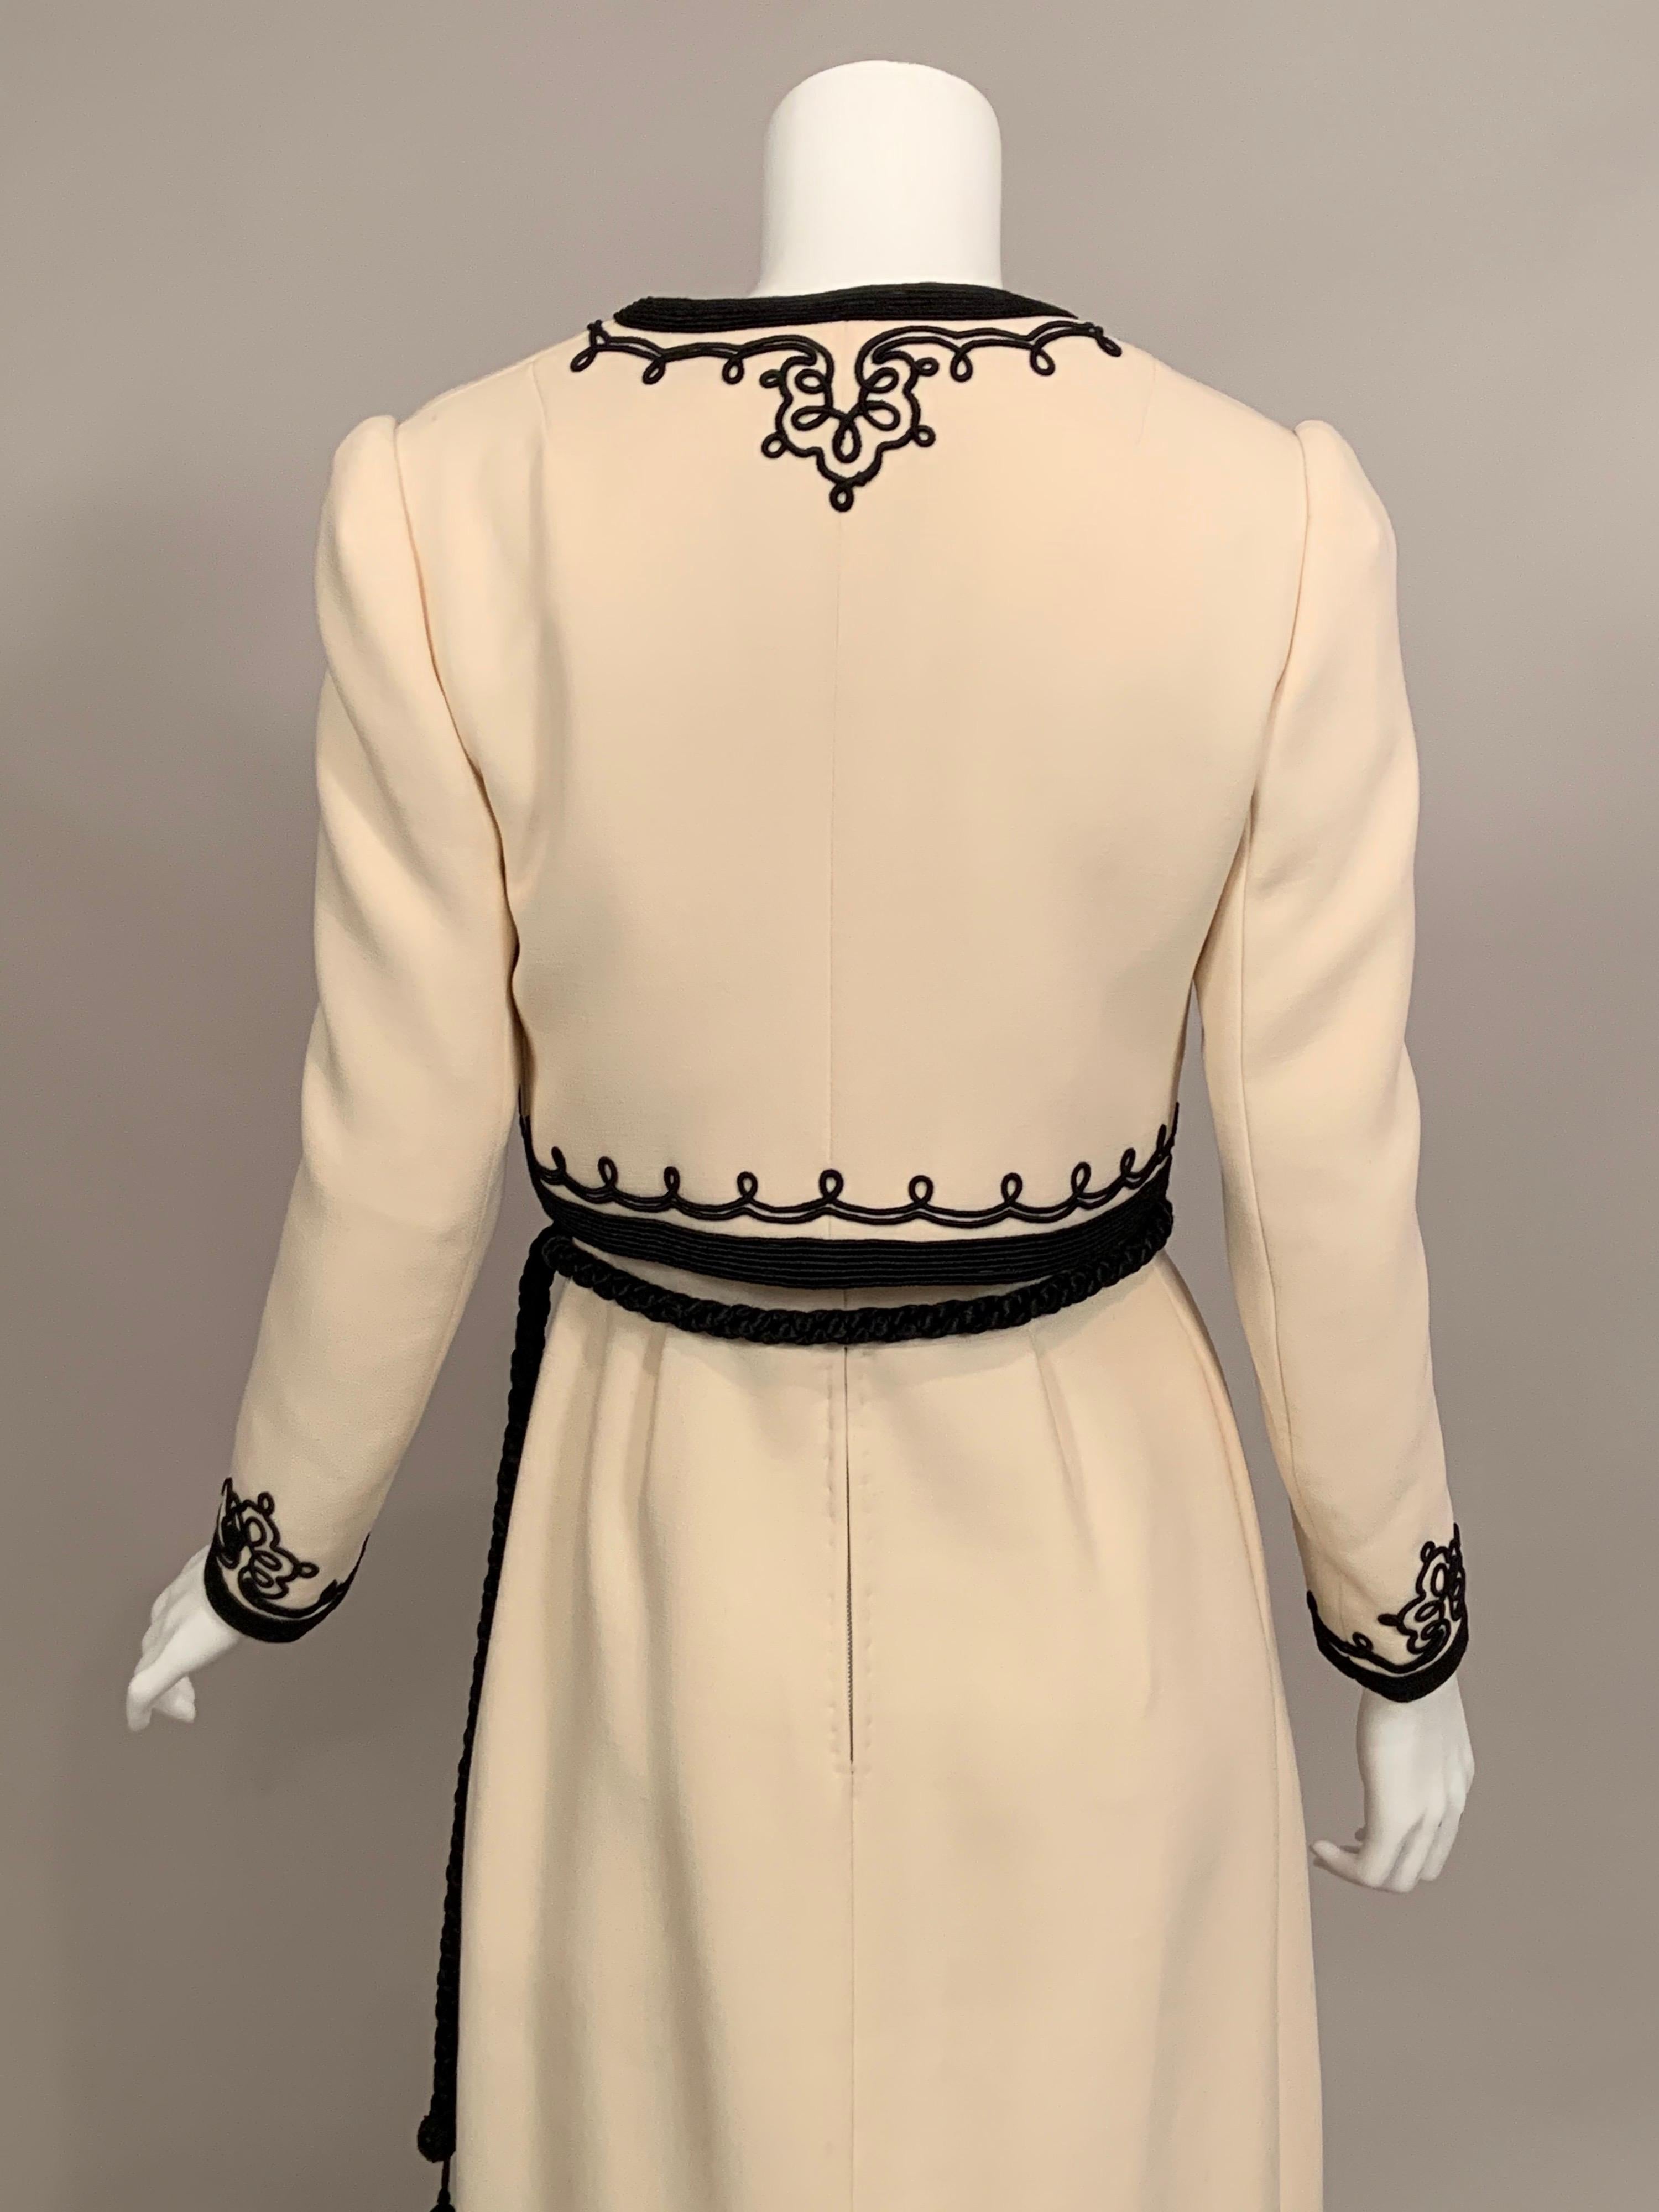 1960's Harry Algo Made in France Cream Wool Dress and Jacket Black Soutache Trim 1